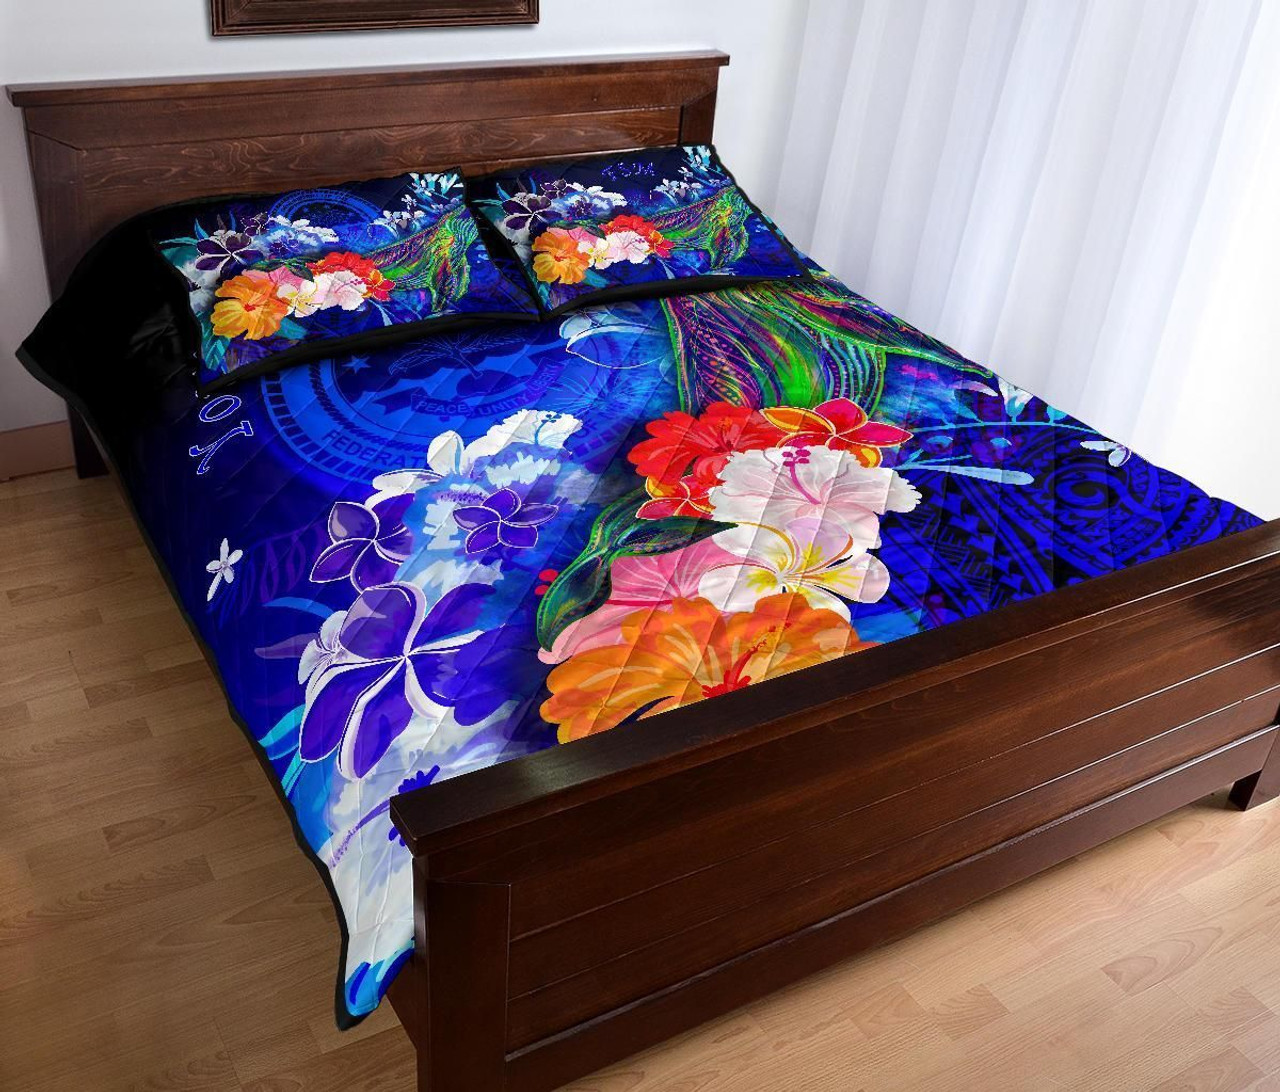 Federated States of Micronesia Custom Personalised Quilt Bed Set - Humpback Whale with Tropical Flowers (Blue) 3